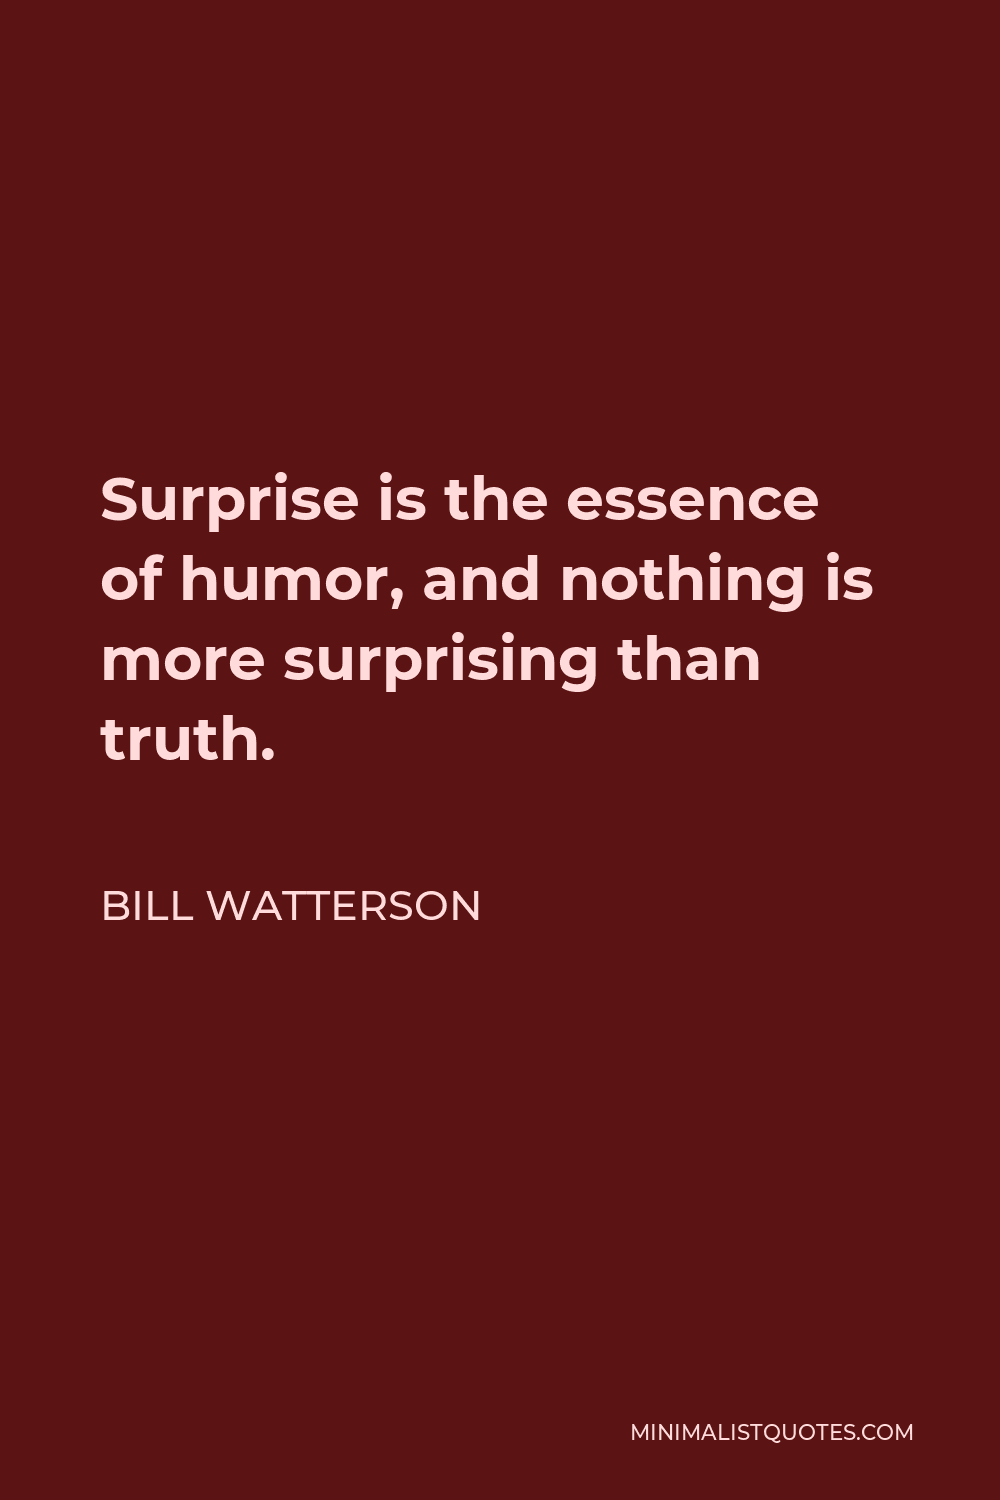 Bill Watterson Quote - Surprise is the essence of humor, and nothing is more surprising than truth.